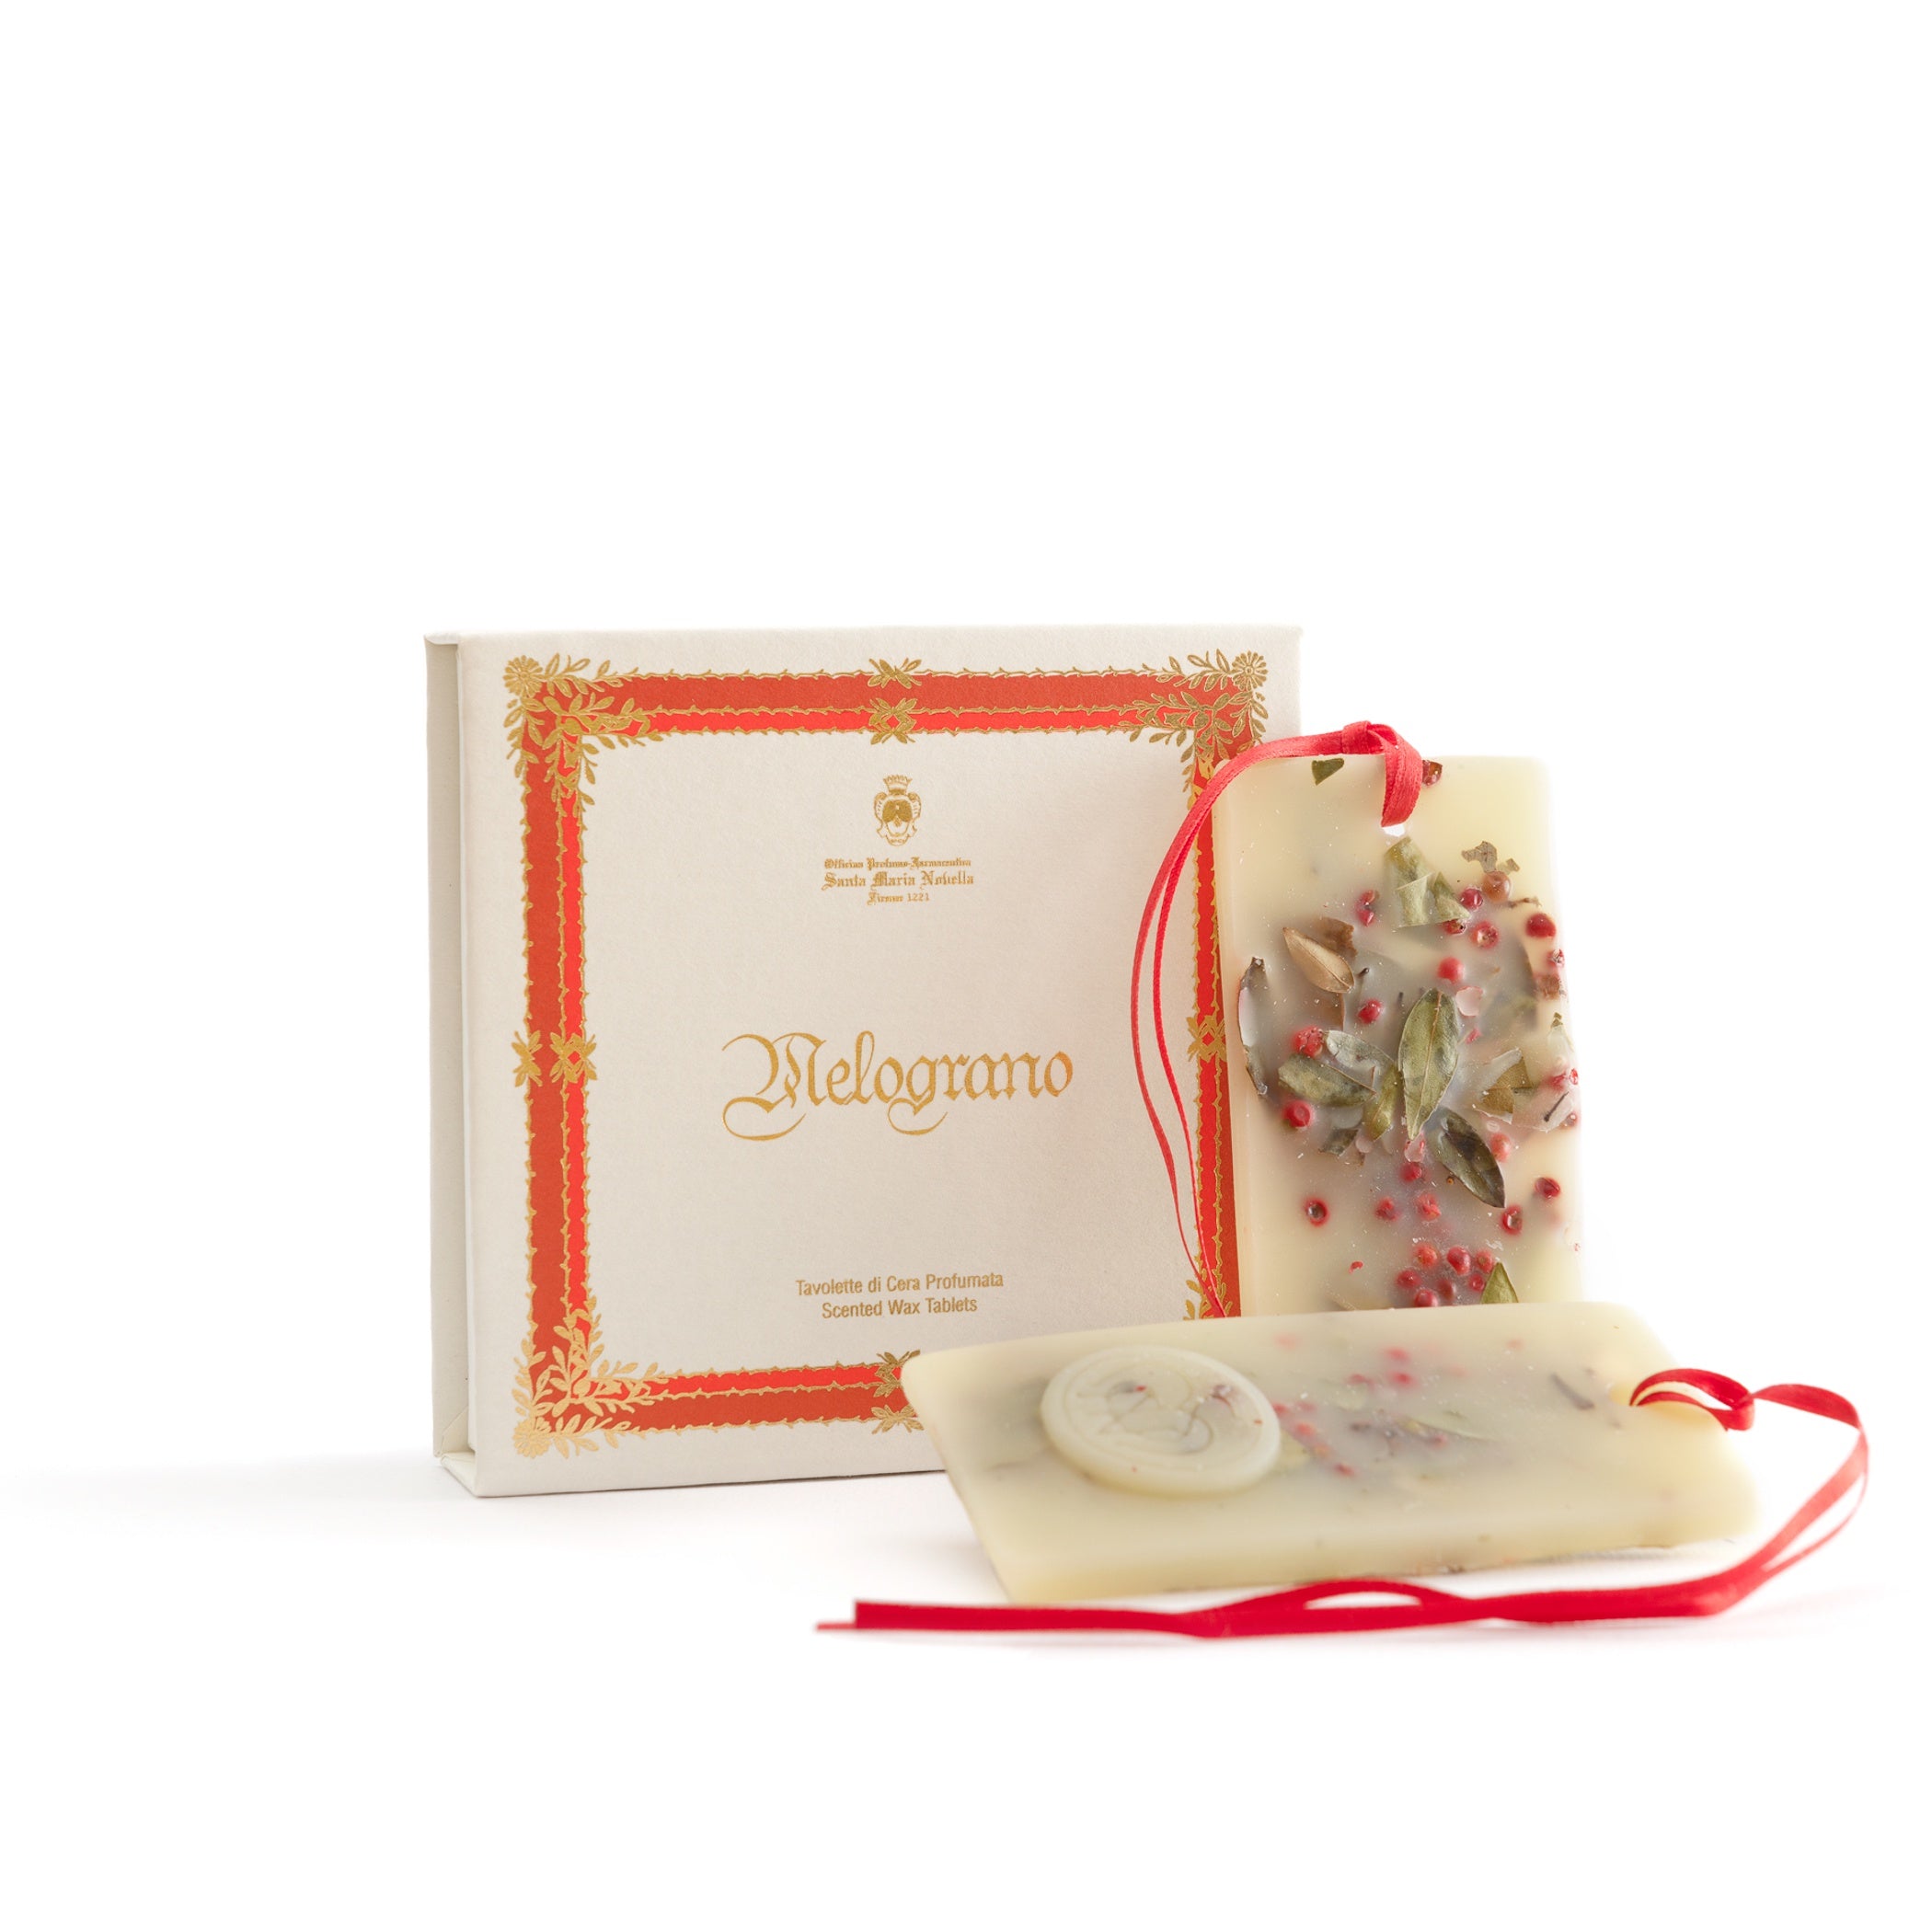 Melograno (Pomegranate) Scented Wax Tablets. Box of 2.